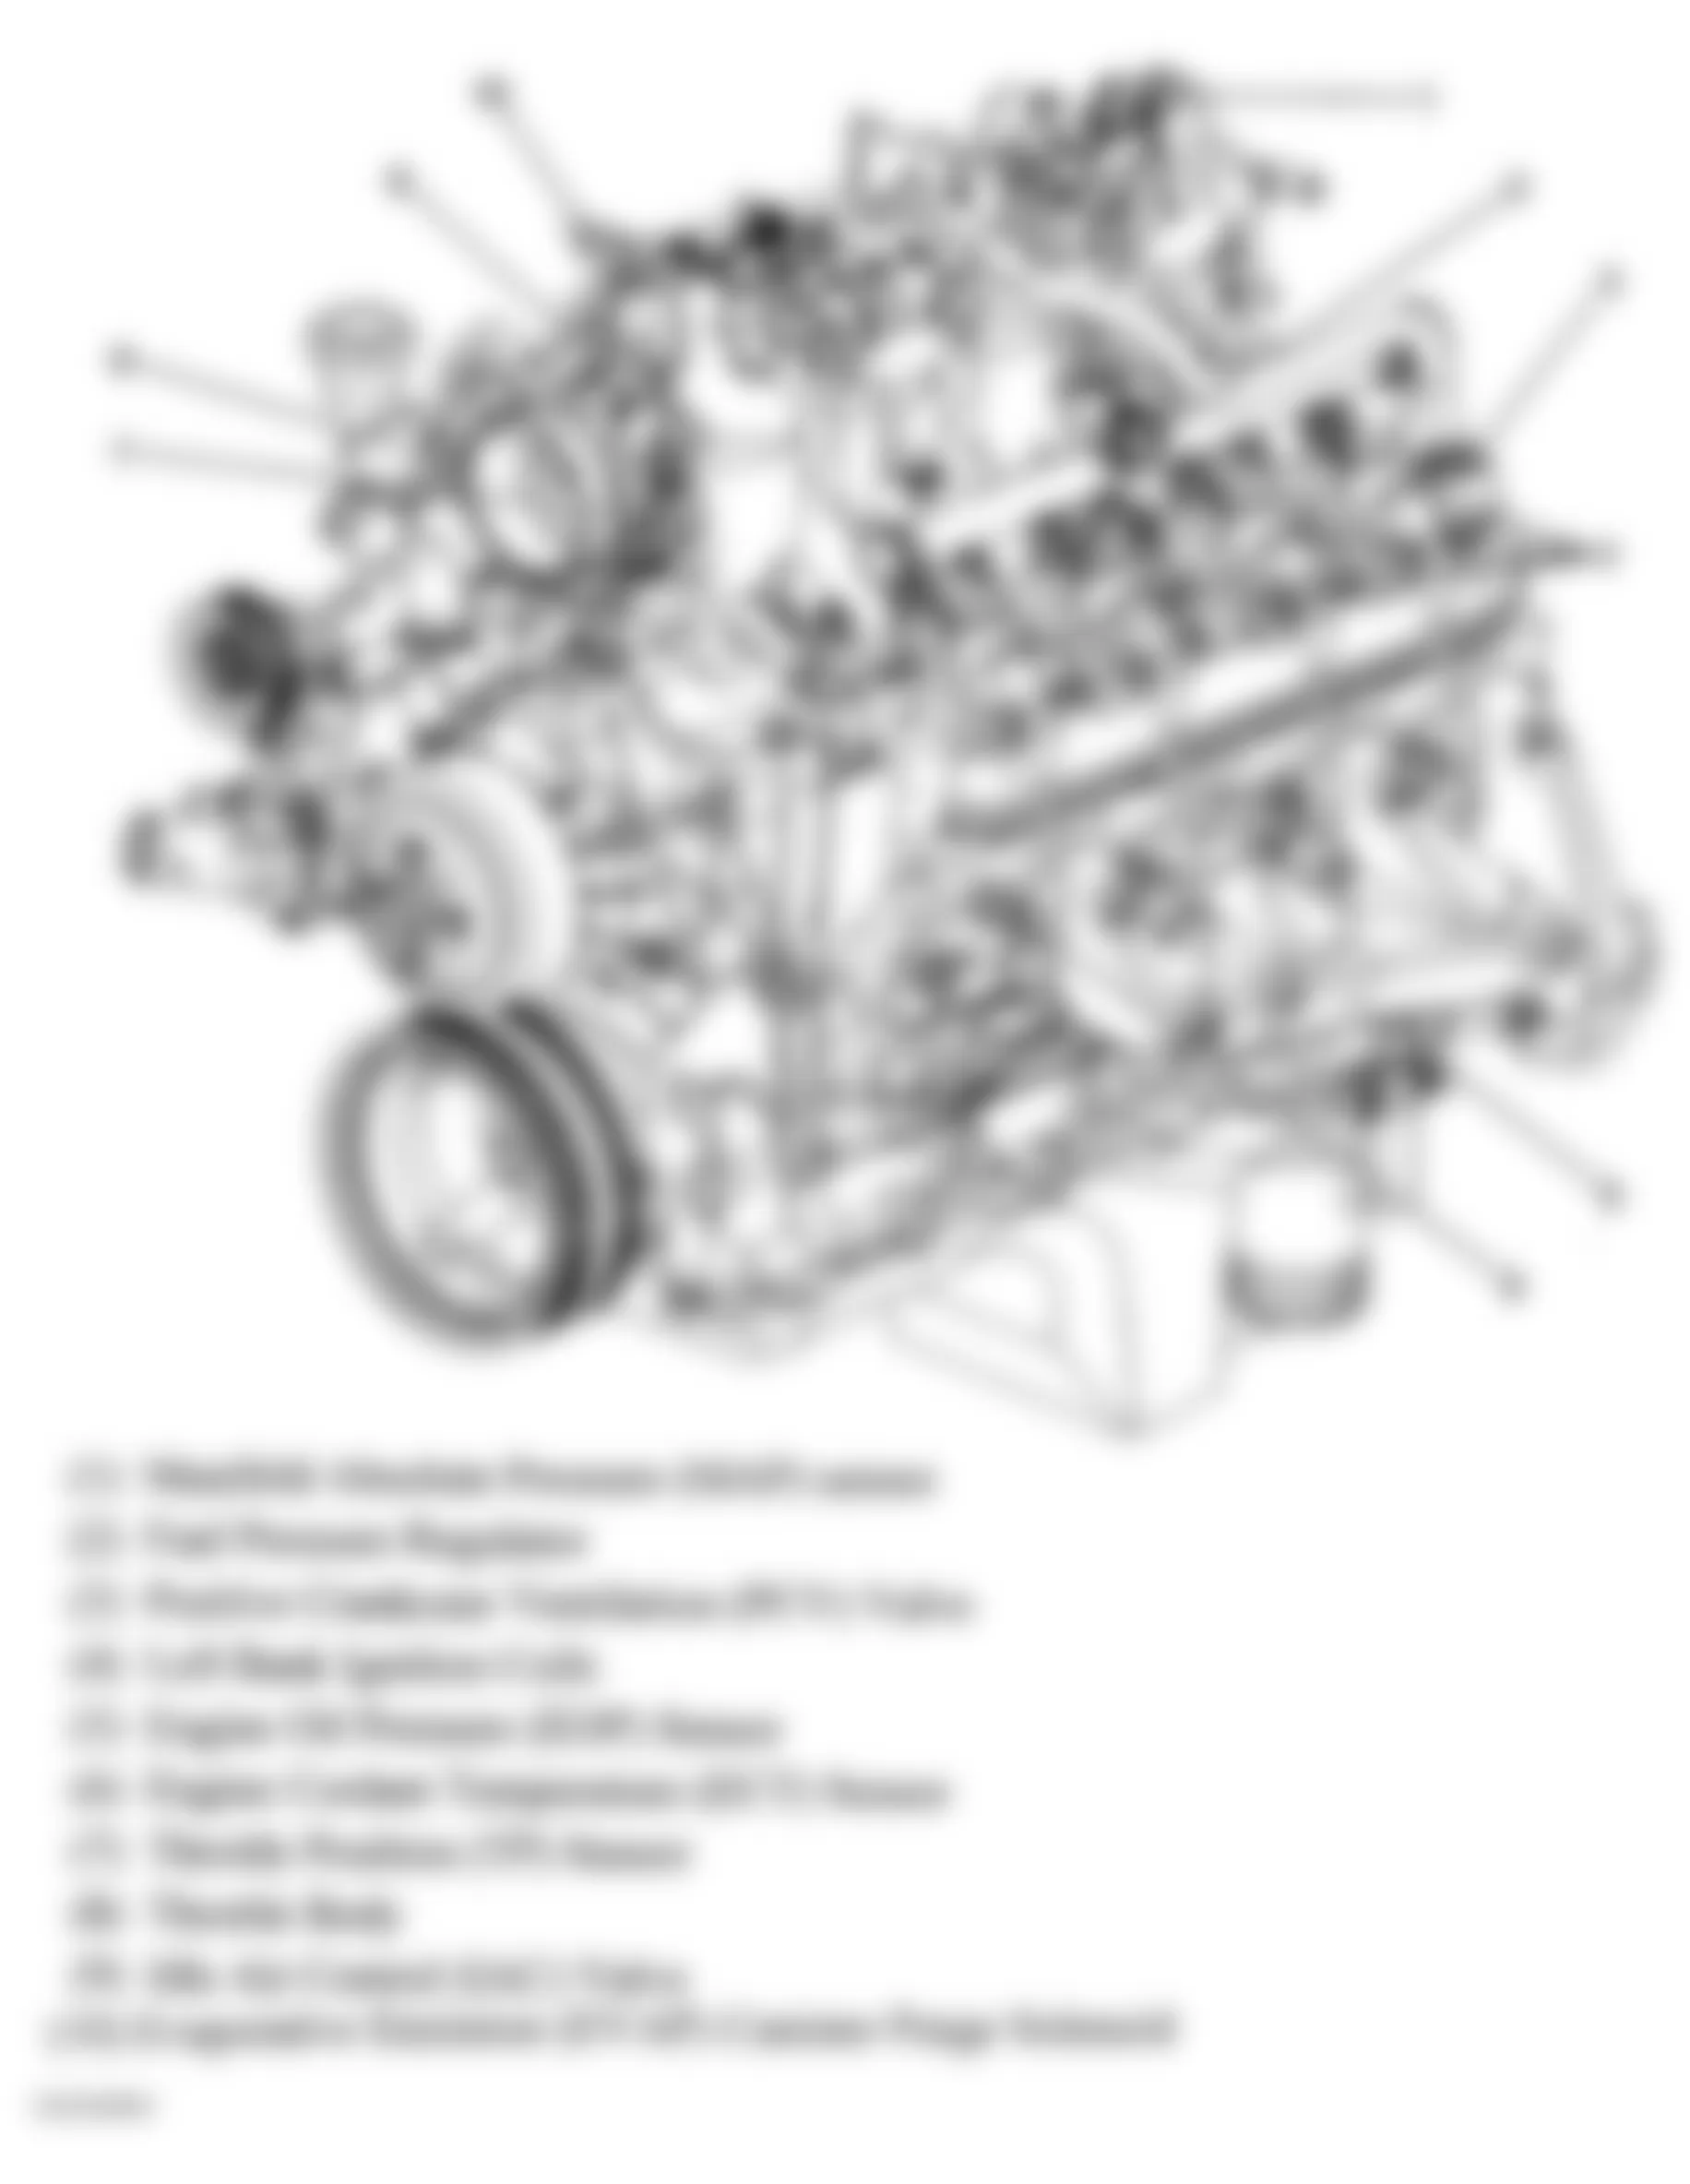 GMC Sierra 2500 HD 2004 - Component Locations -  Left Front Of Engine (4.8L, 5.3L & 6.0L)